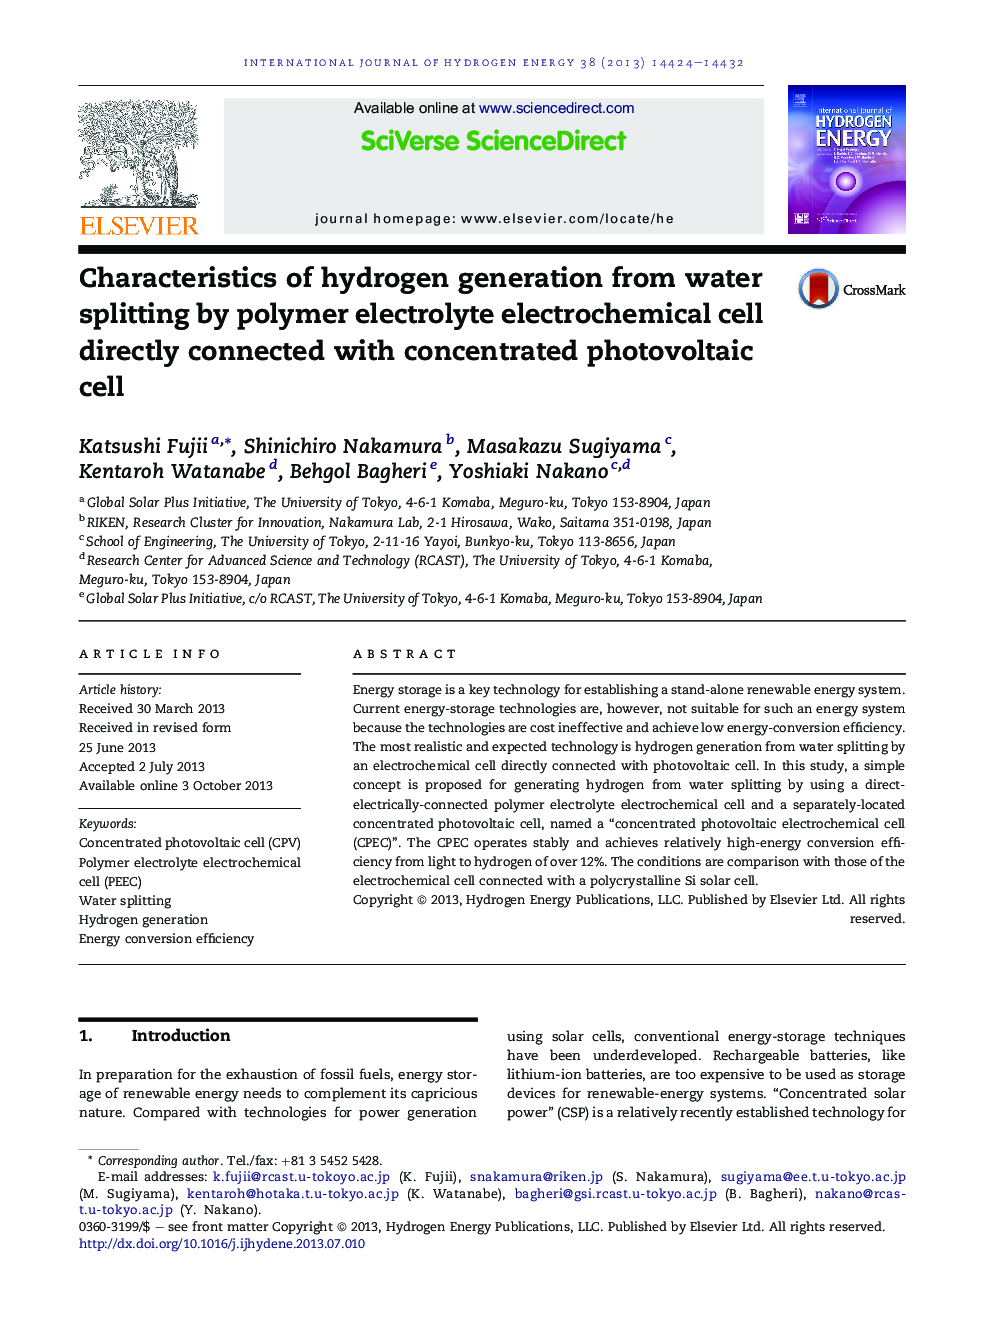 Characteristics of hydrogen generation from water splitting by polymer electrolyte electrochemical cell directly connected with concentrated photovoltaic cell